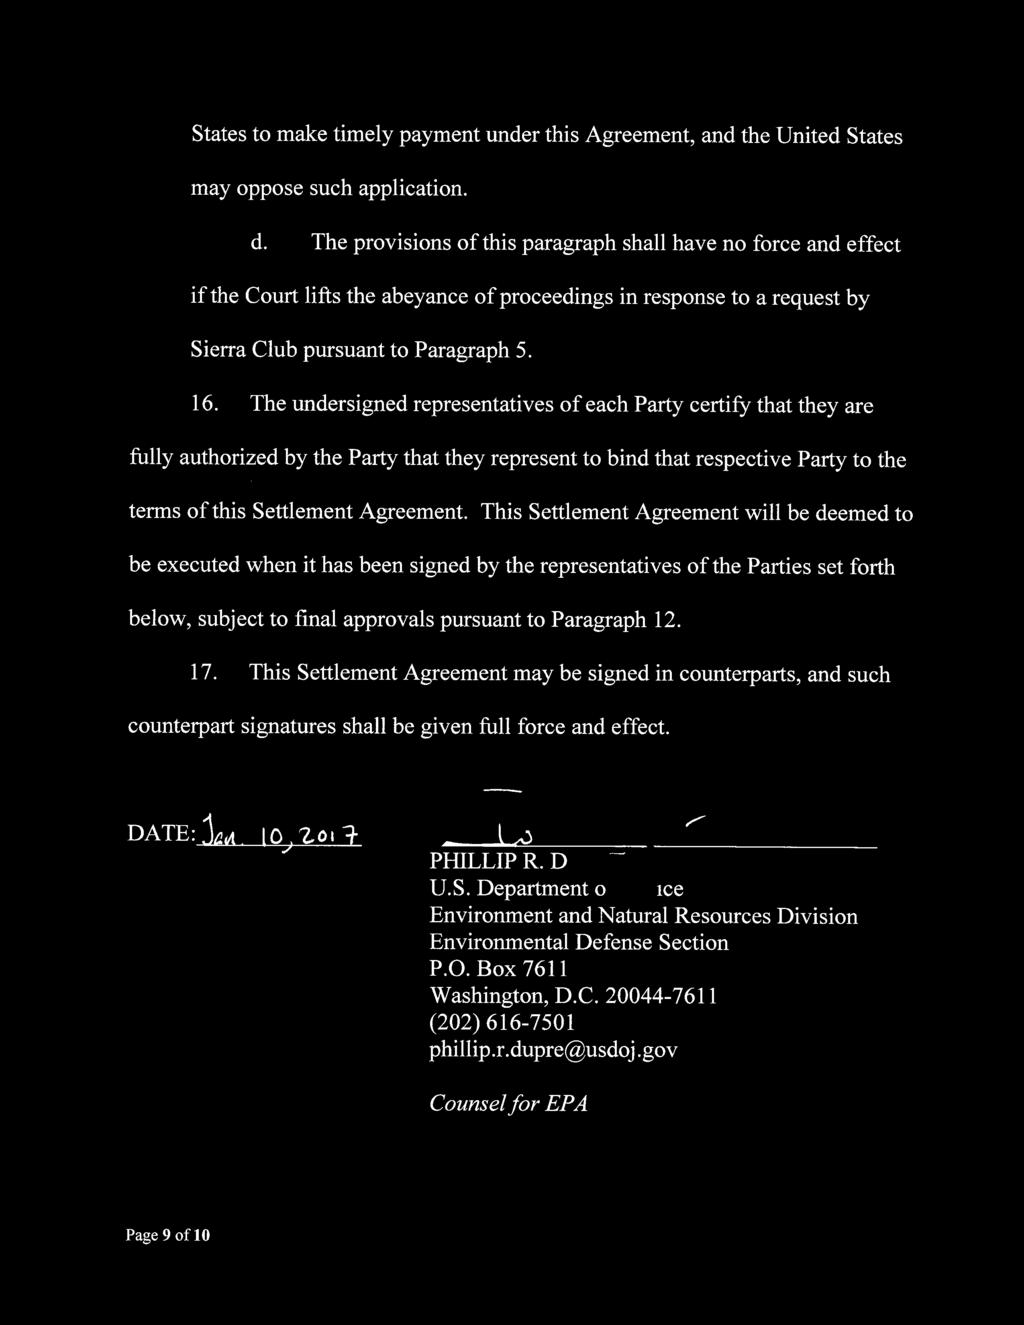 The undersigned representatives of each Party certify that they are fully authorized by the Party that they represent to bind that respective Party to the terms of this Settlement Agreement.